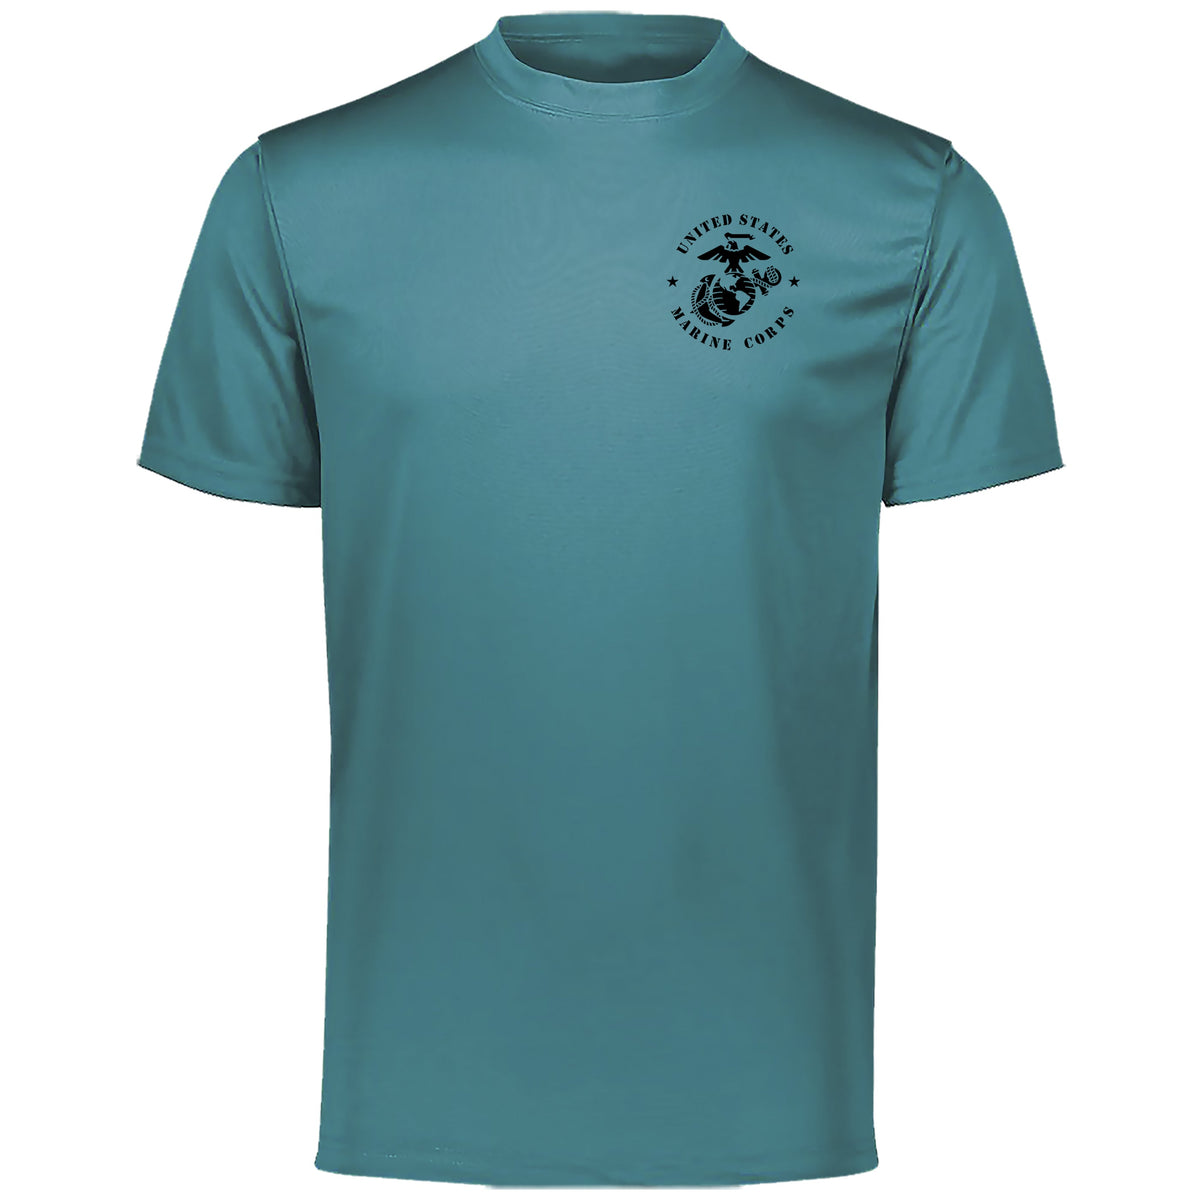 Closeout Full Circle USMC Chest Seal Performance Teal Tee